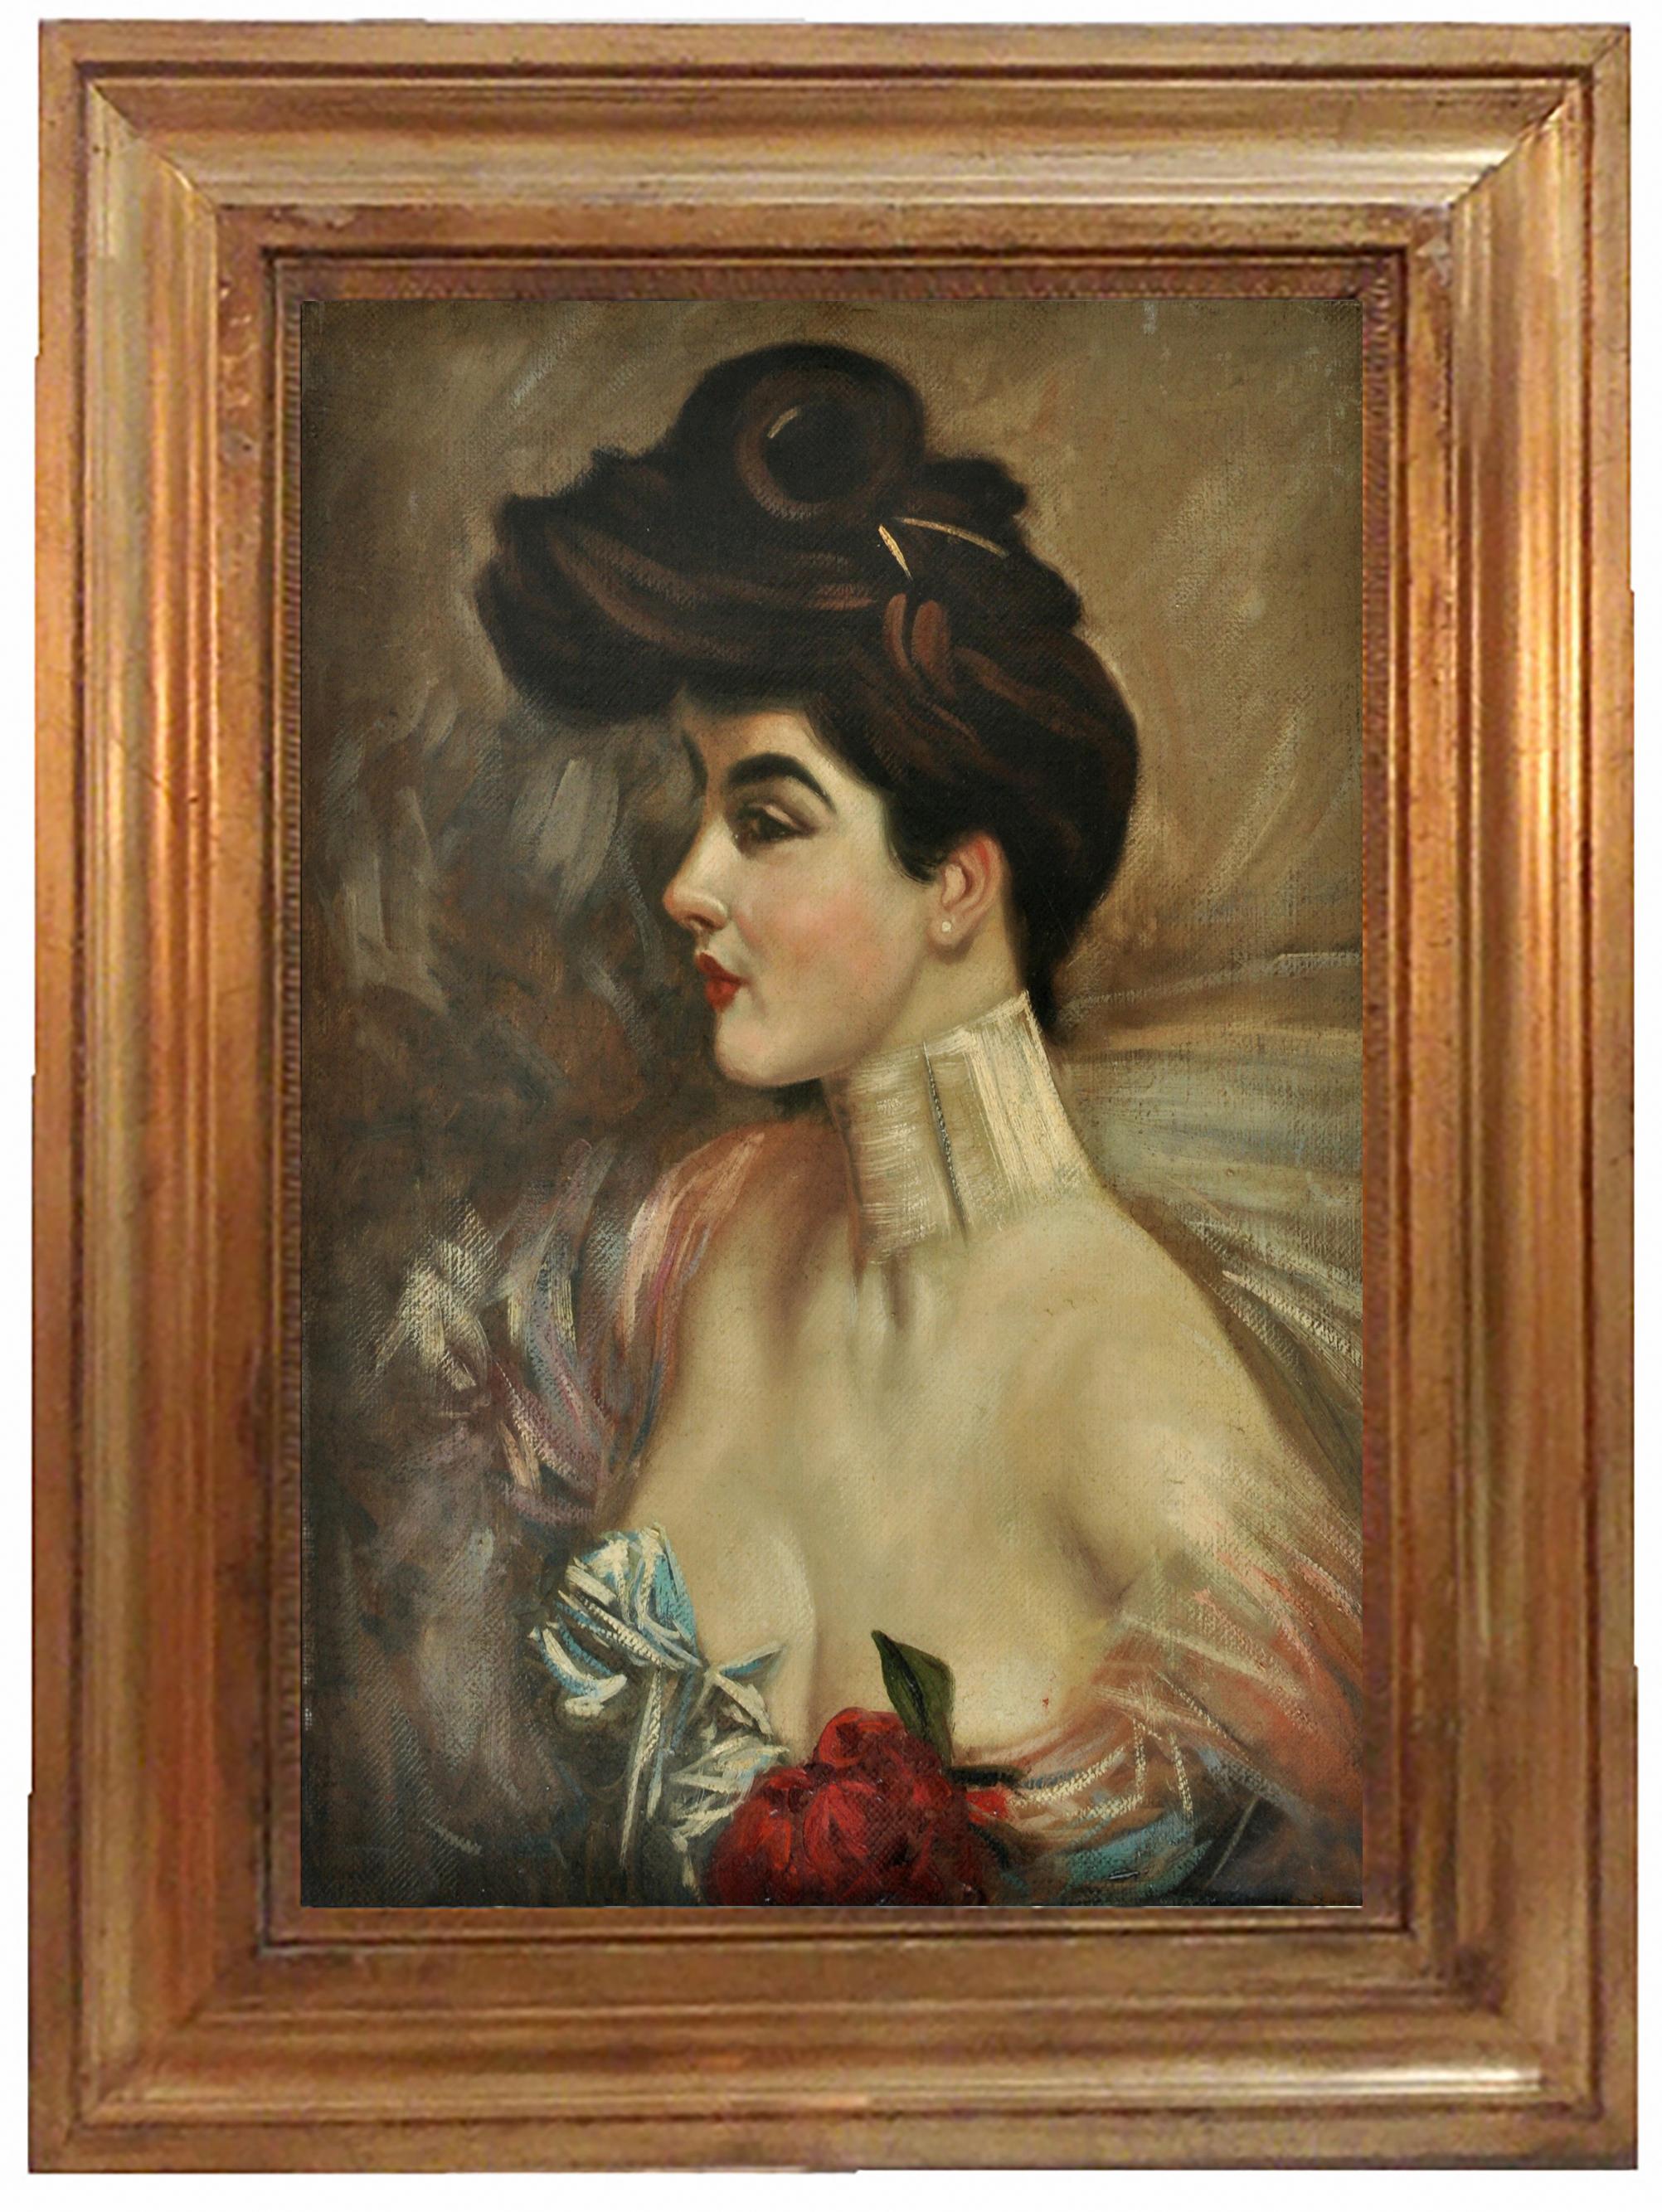 LADY'S PORTRAIT - In the Manner of G. Boldini - Italian Oil on Canvas Painting